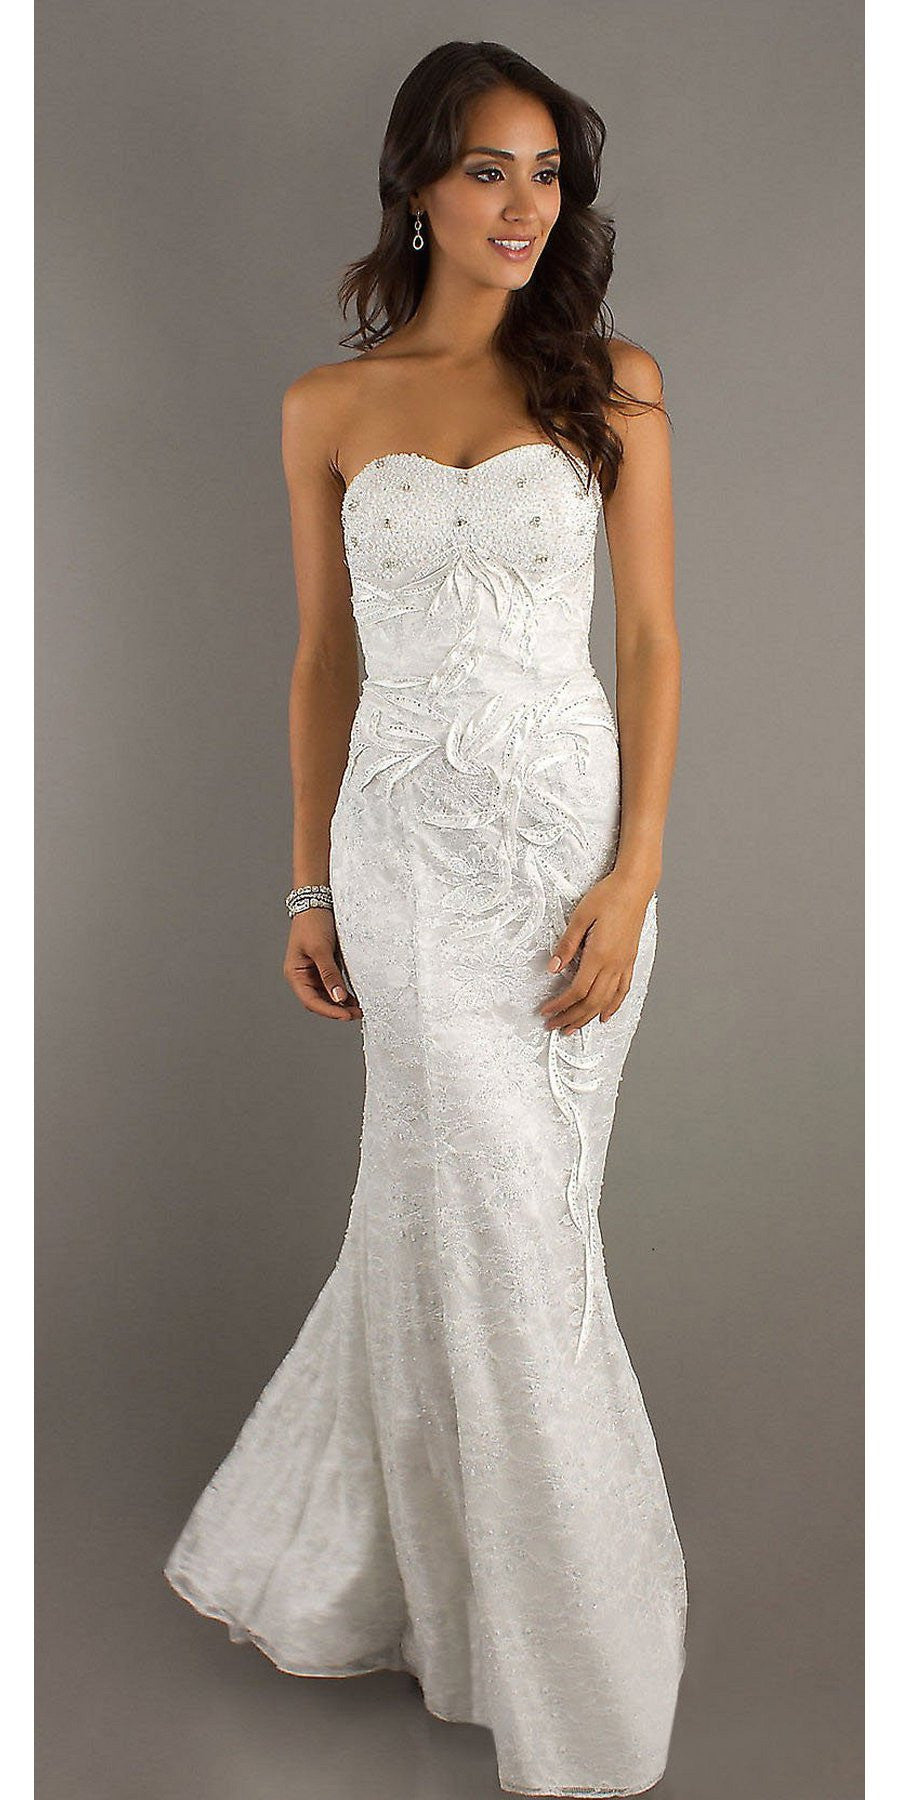 Red Carpet Ivory Celebrity Lace Formal Gown Long Strapless Beads